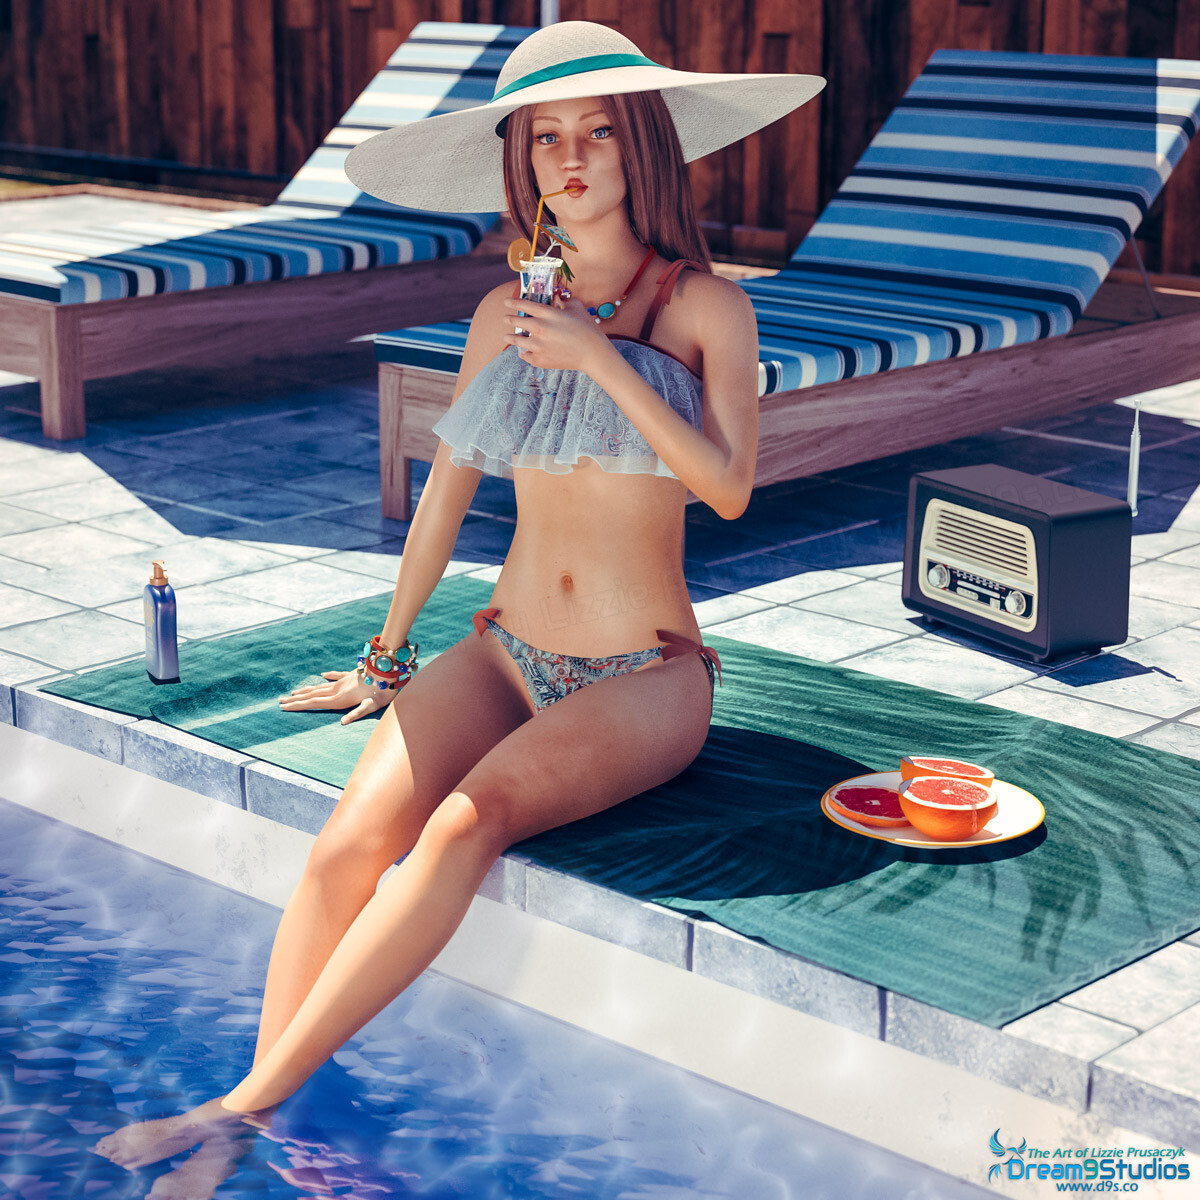 A lovely woman lounges by the pool while sipping a tropical drink during a warm summer day.